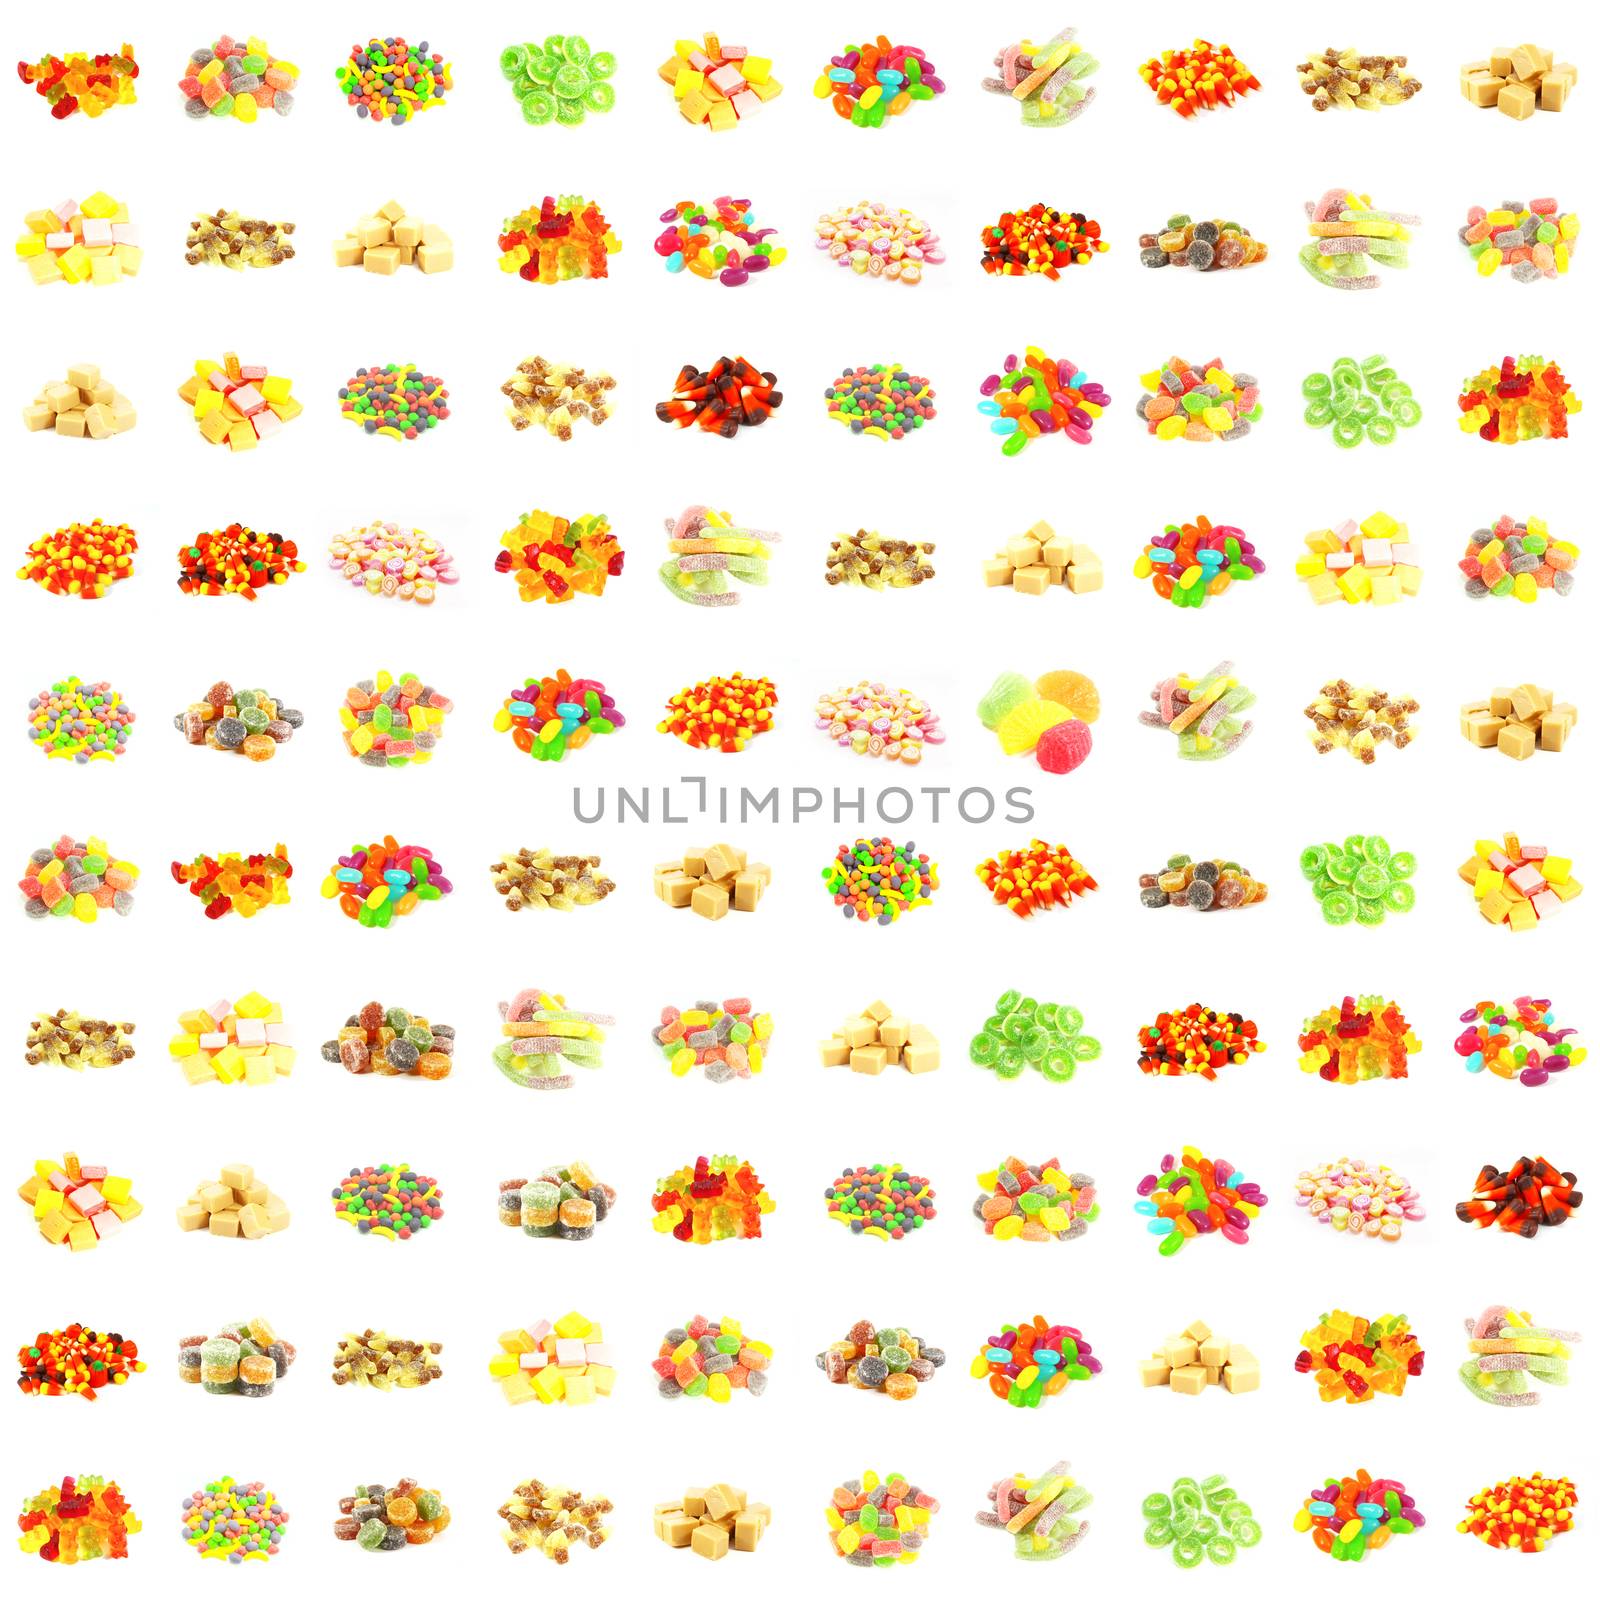 Seamless Sweets and Candy Pattern Background on White